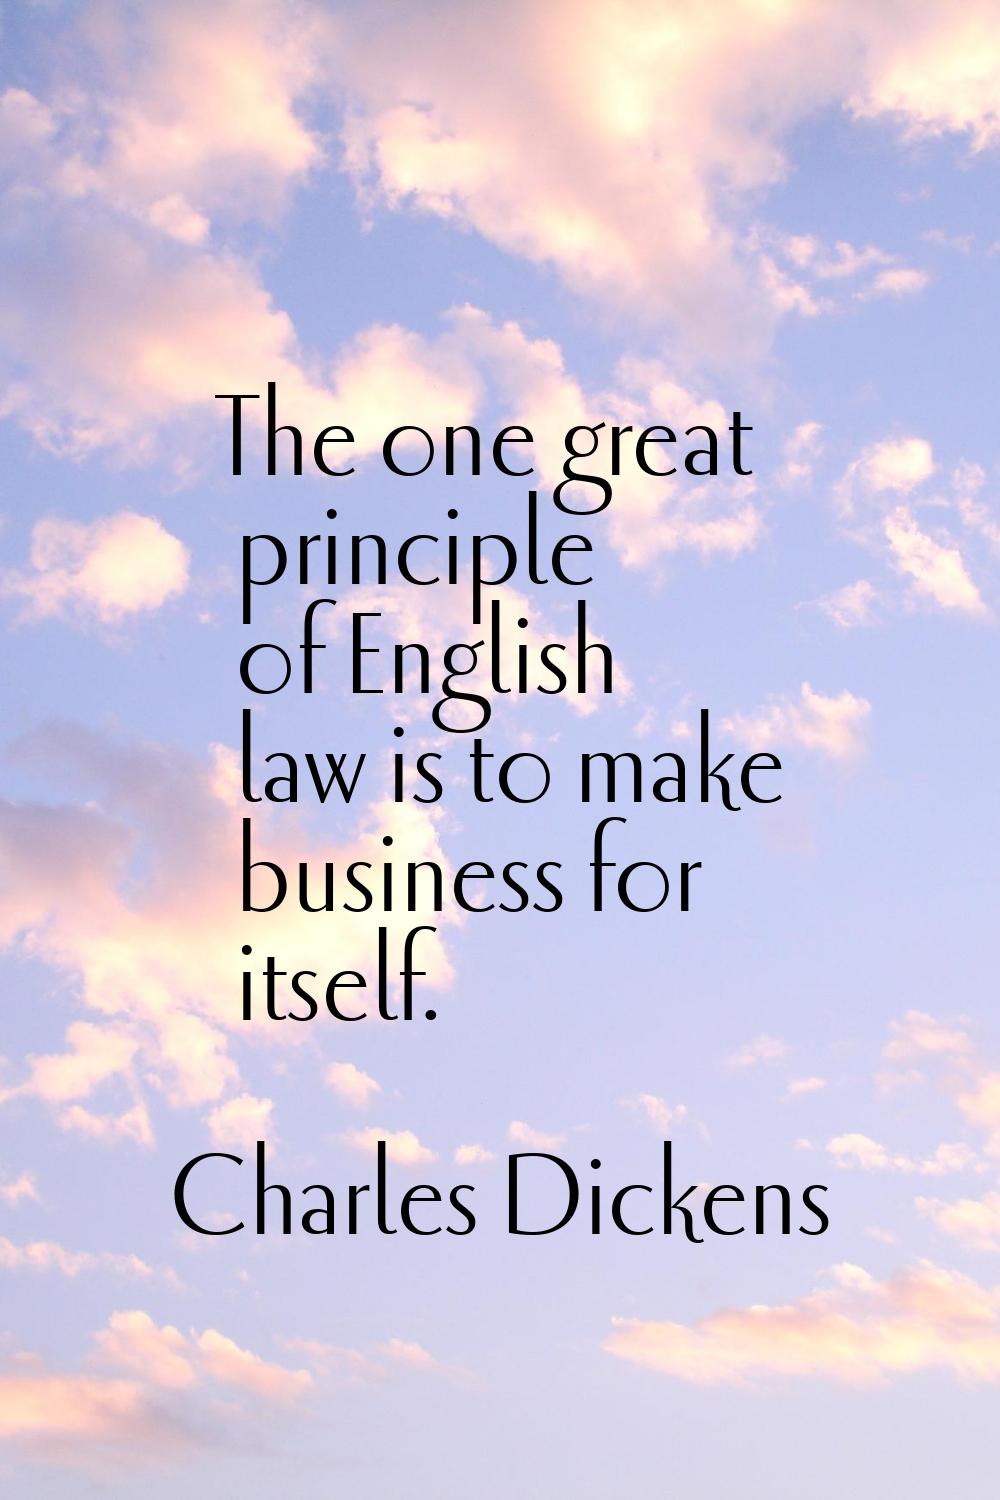 The one great principle of English law is to make business for itself.